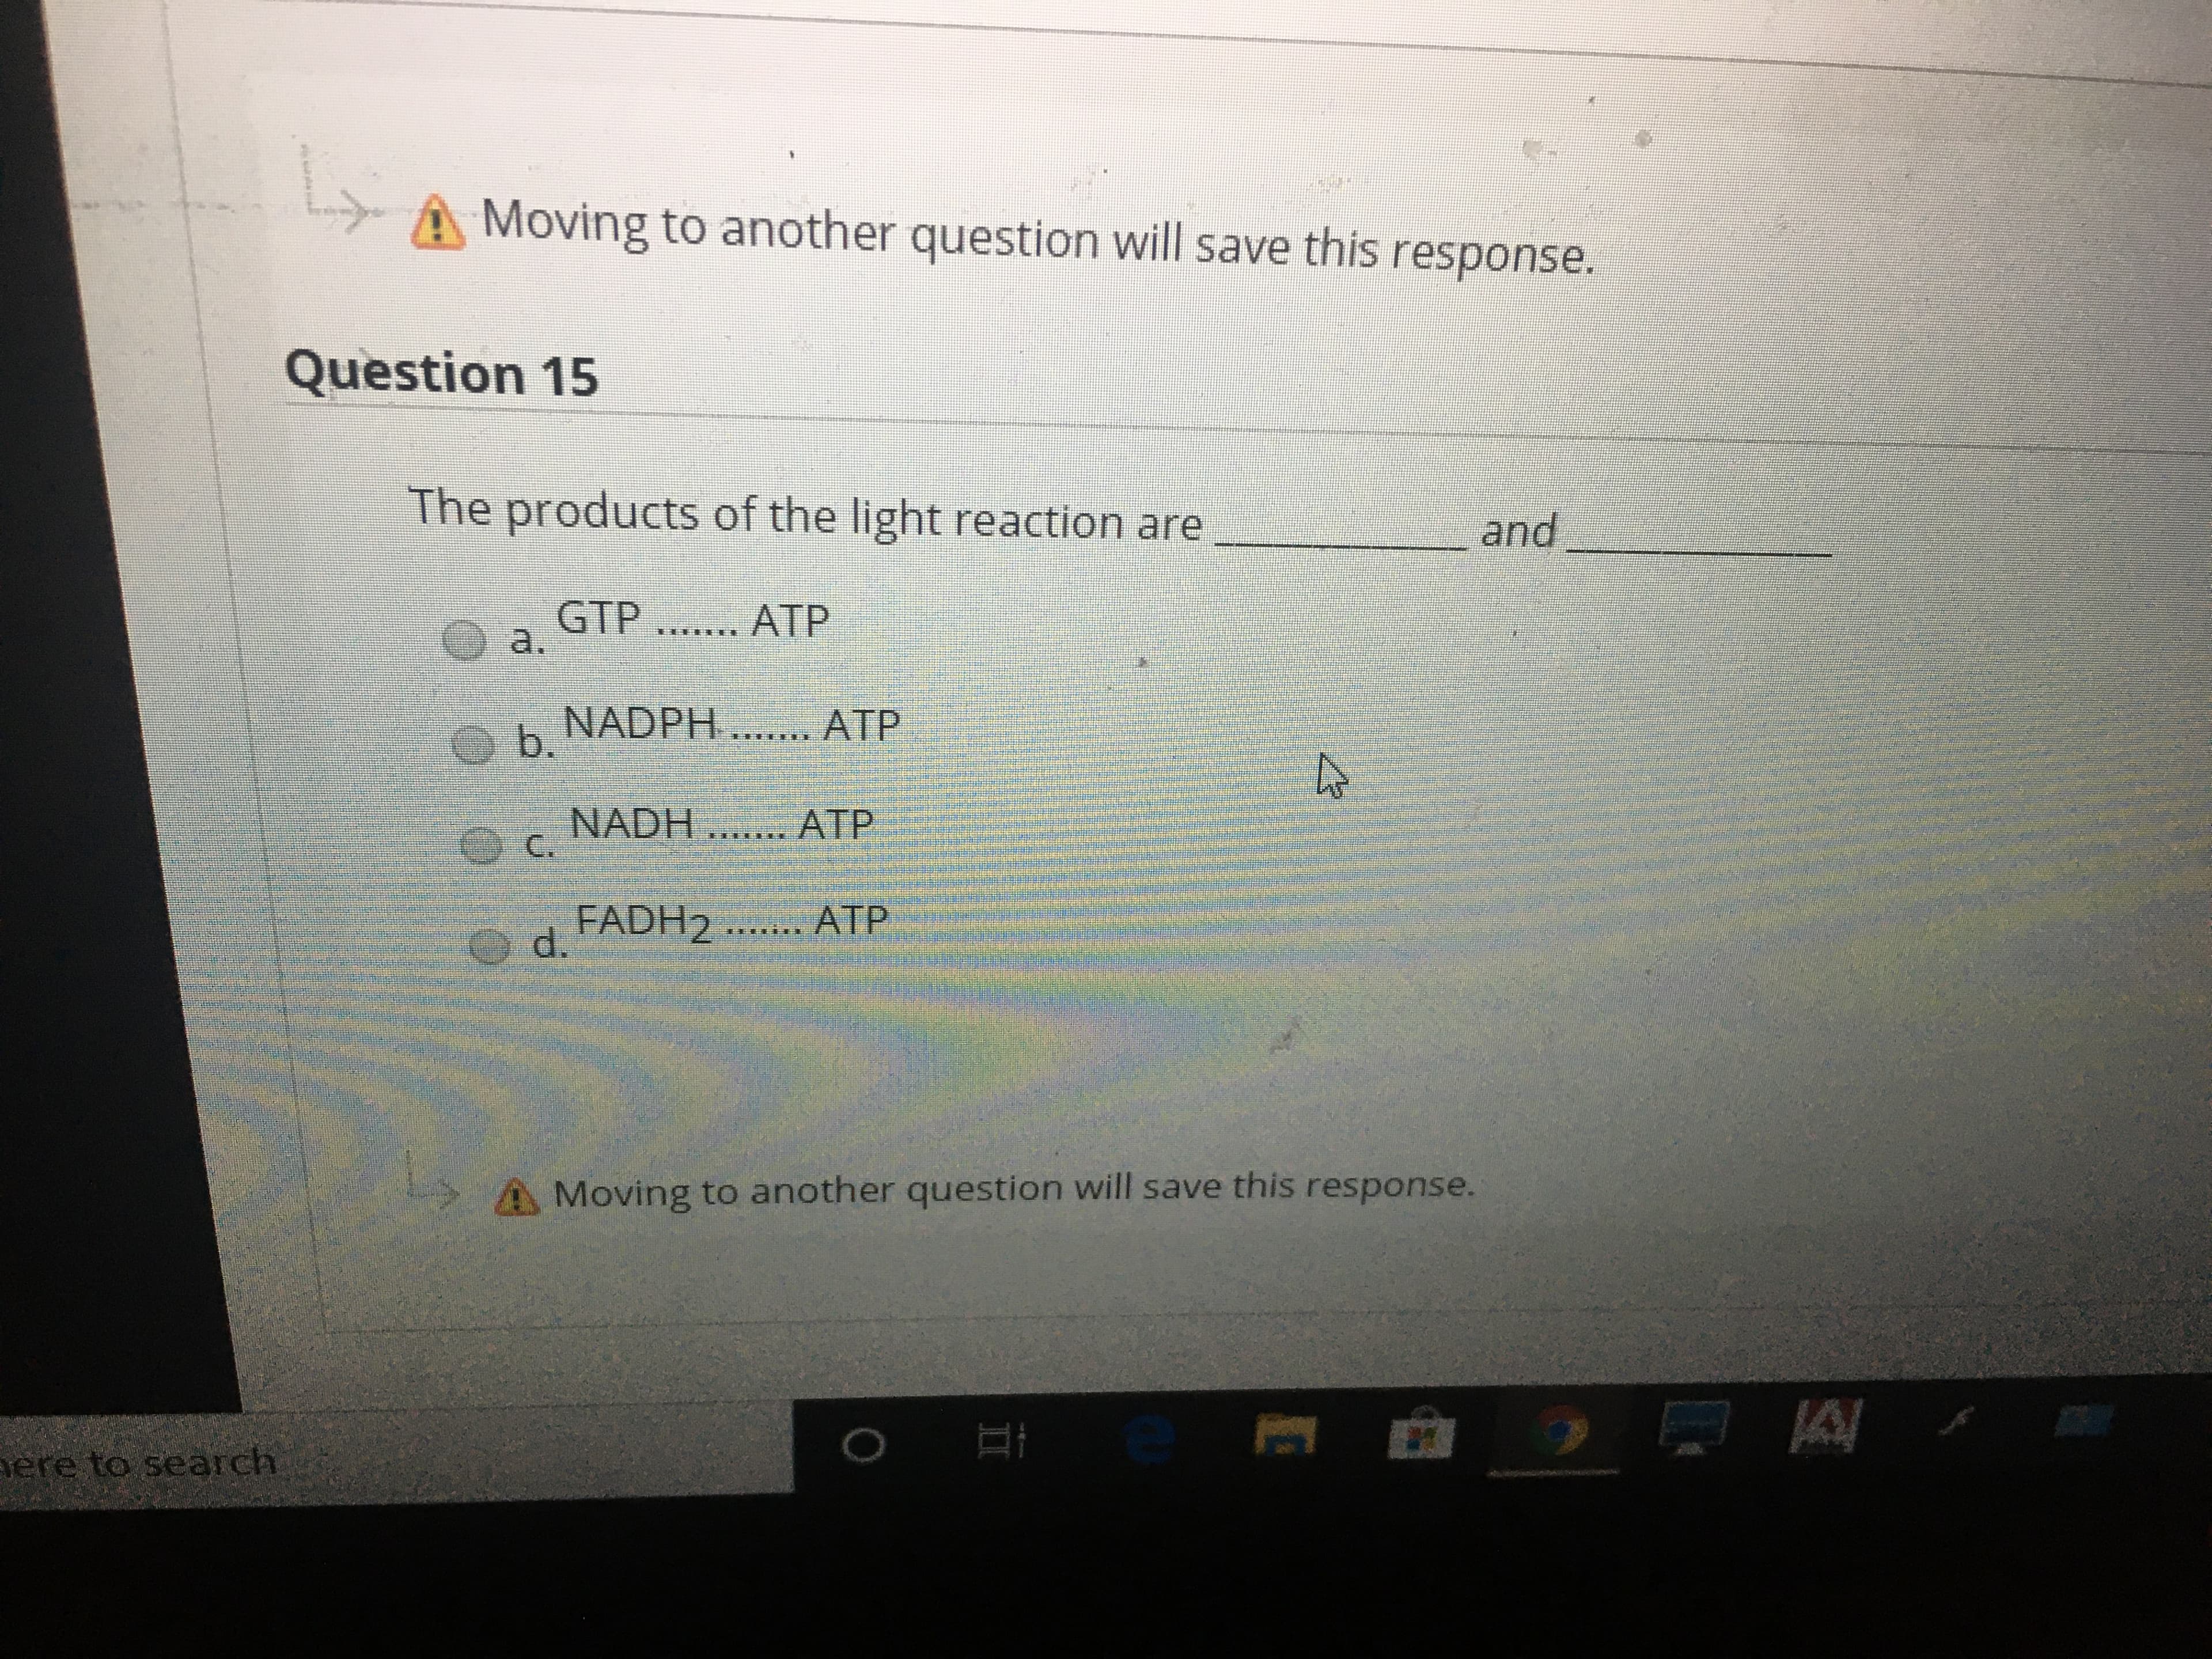 Moving to another question will save this response.
Question 15
The products of the light reaction are
and
GTP
a.
ATP
..
NADPH ... ATP
b.
NADH .. ATP
FADH2 ... ATP
A Moving to another question will save this response.
ere to search
II
